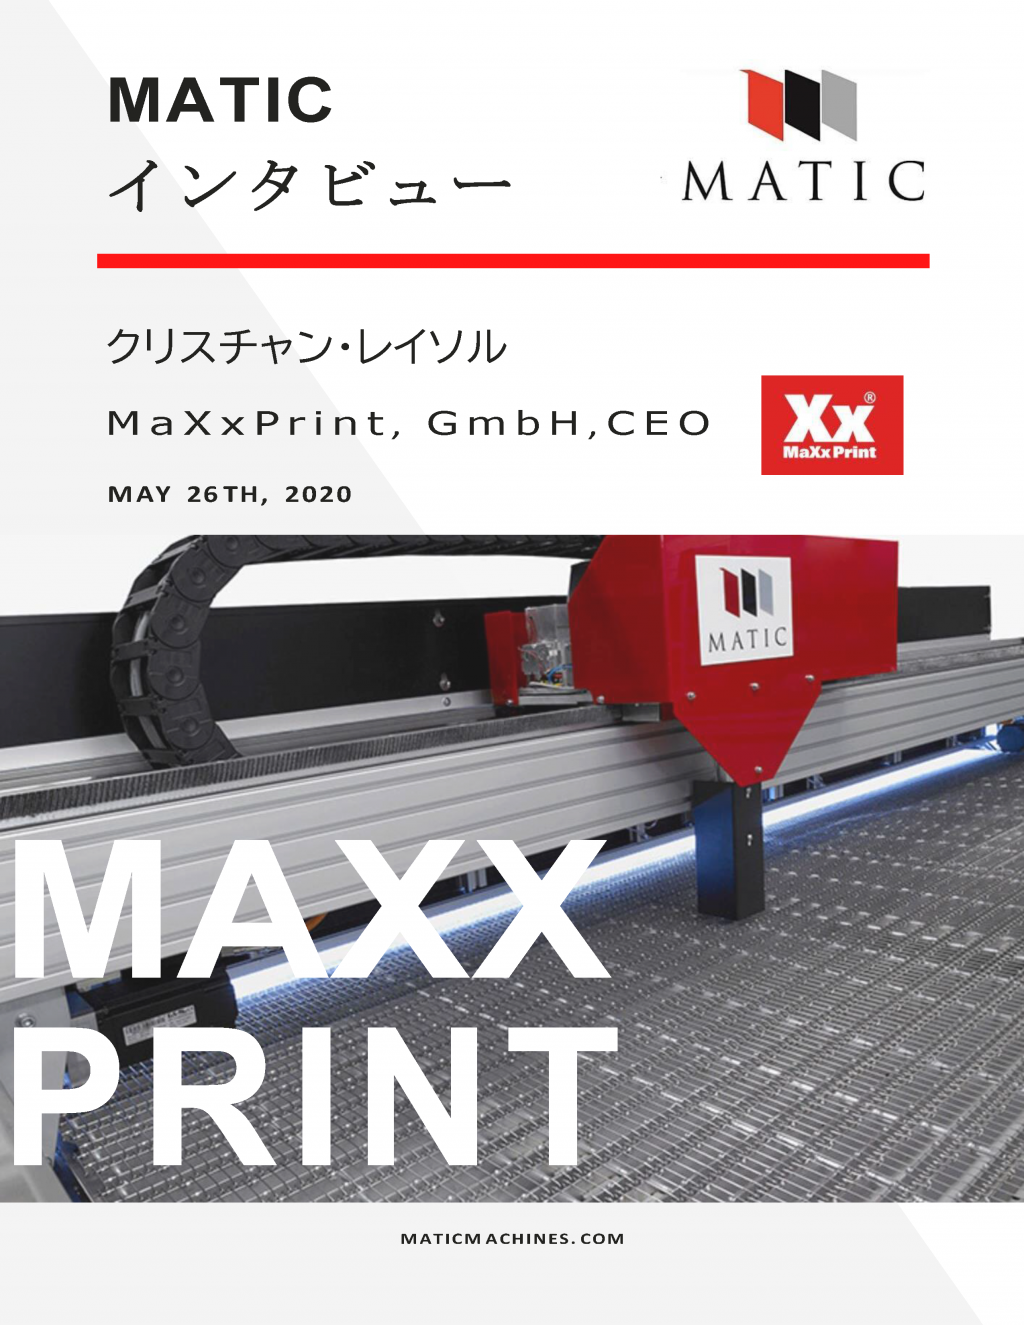 Interview with MaXxprint